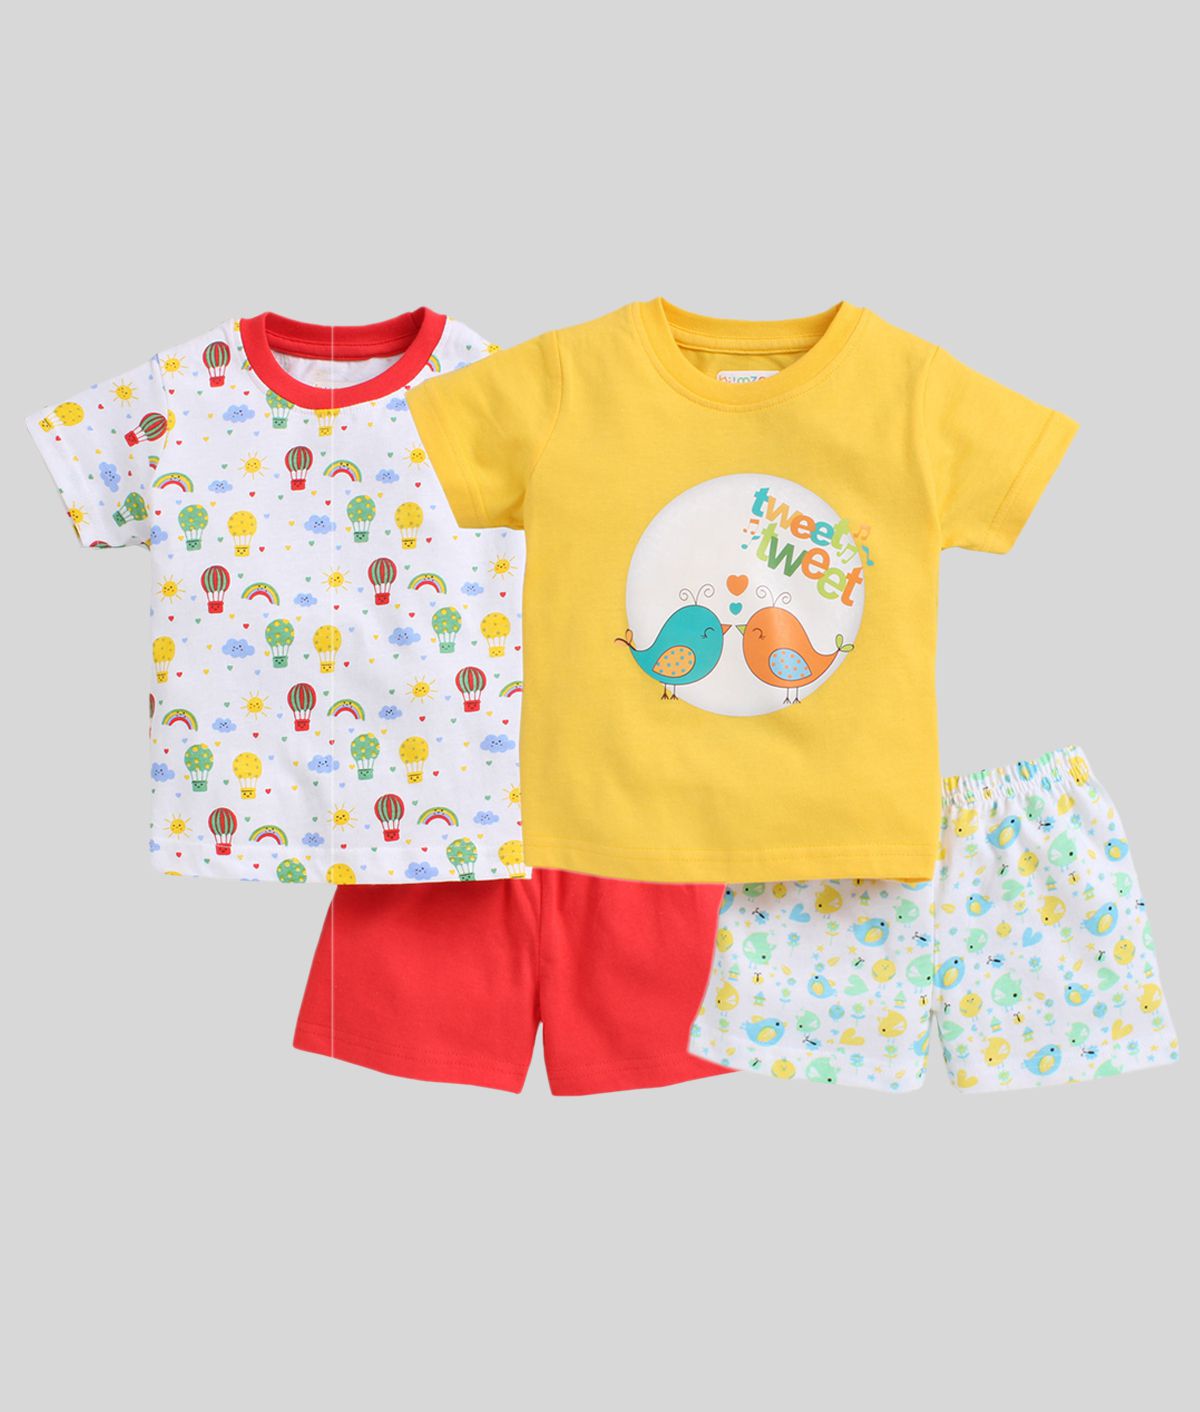 BUMZEE Red & Yellow Baby Girls T-Shirt & Shorts Set Pack of 2 Age - 12-18 Months